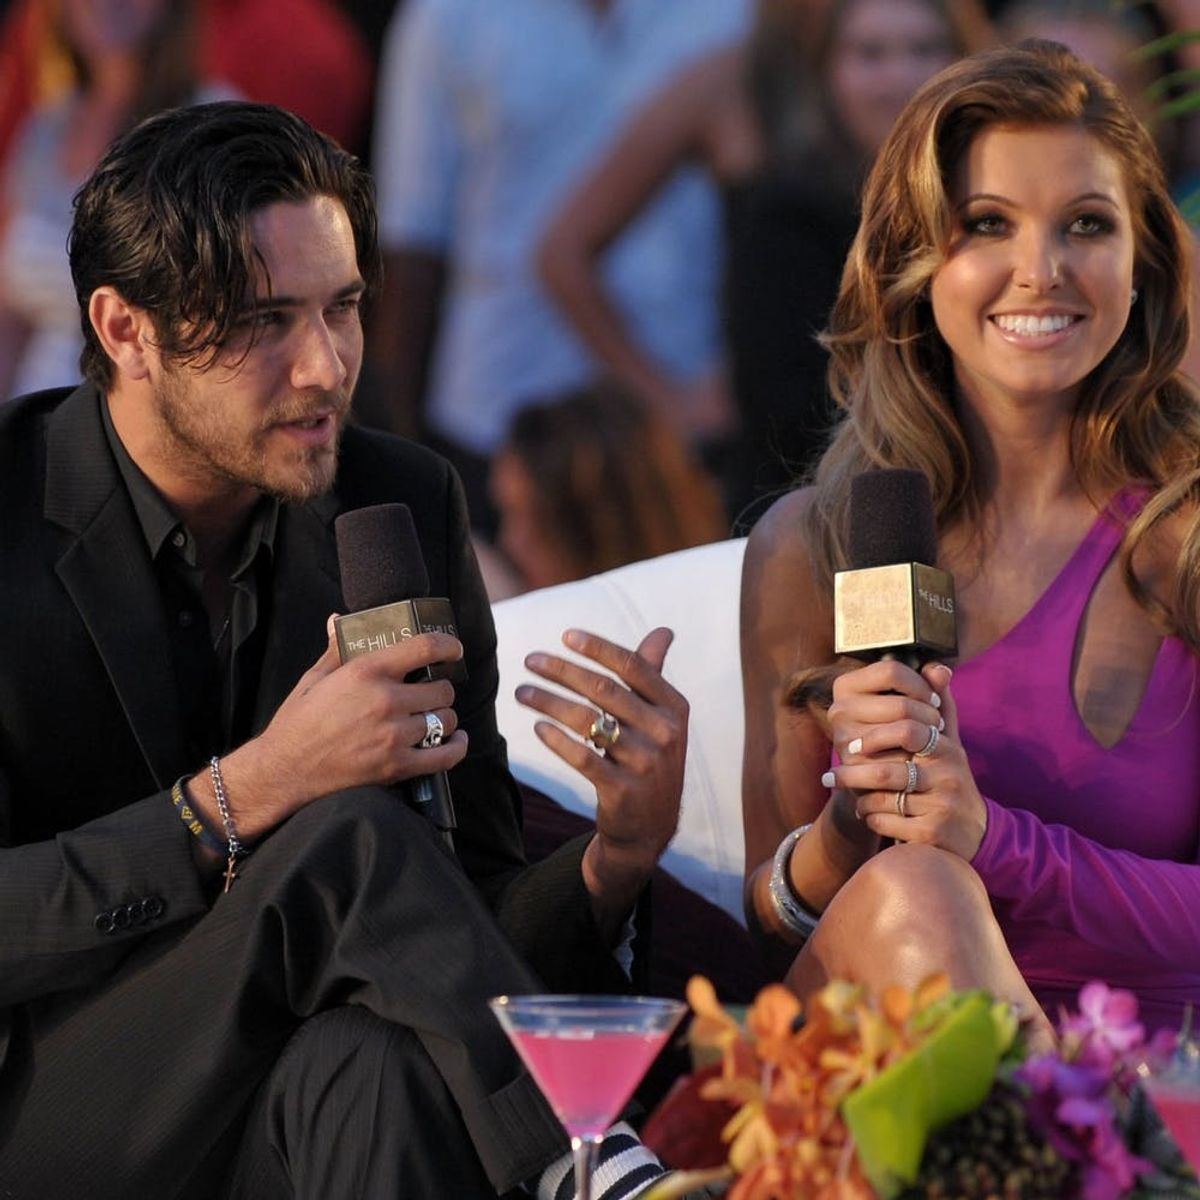 “The Hills” Star Justin Bobby Says He and Audrina Patridge Have Reconnected